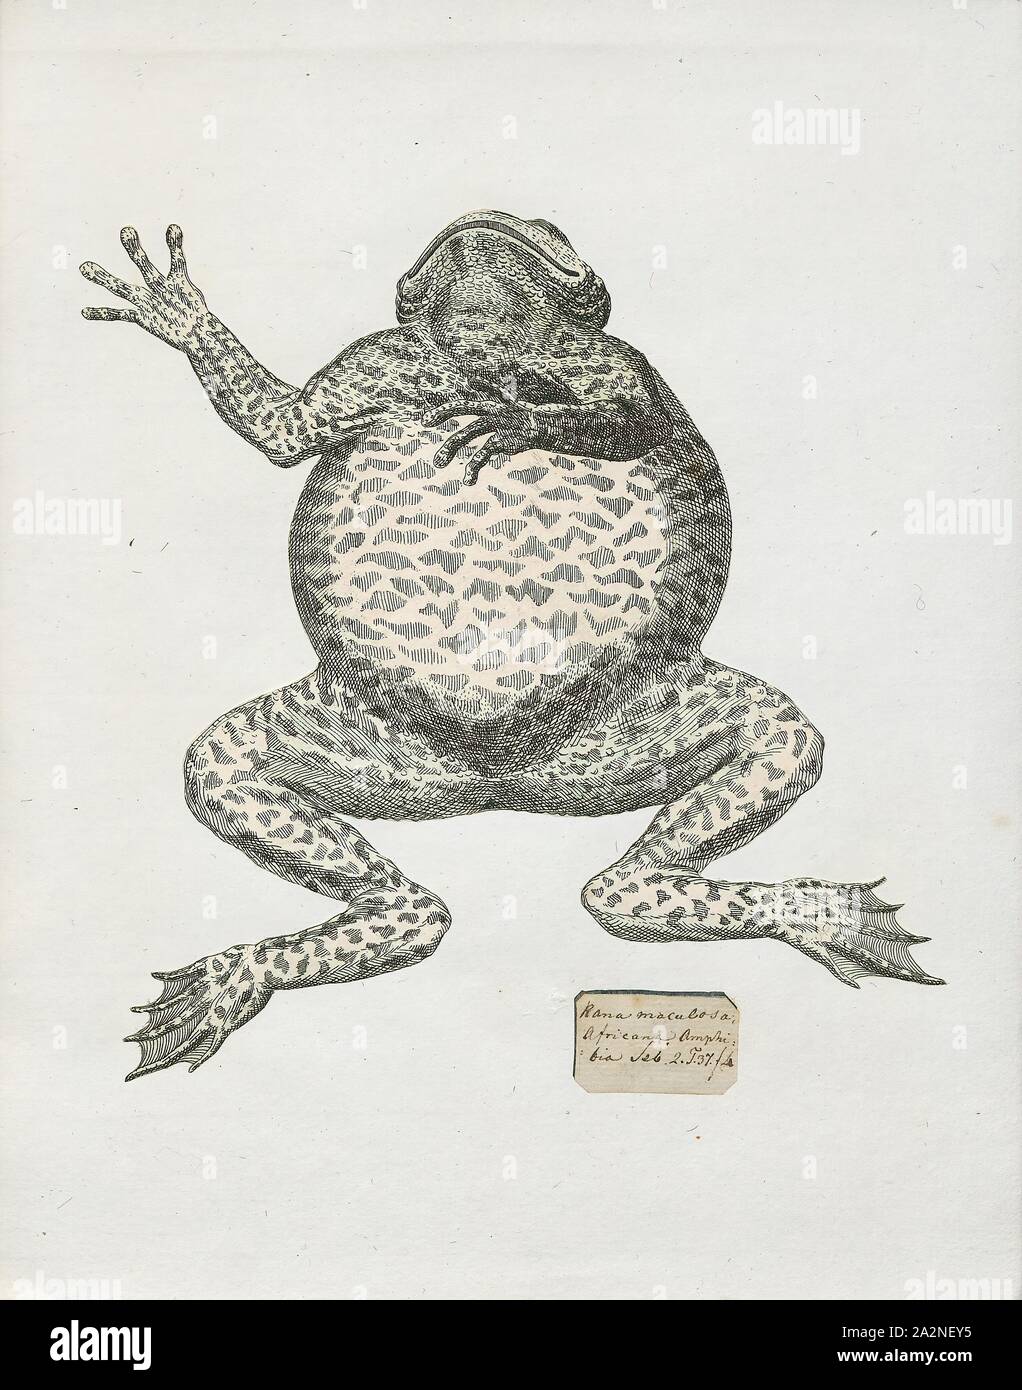 Rana maculosa, Print, Nanorana arnoldi (common name: Arnold's paa frog) is a species of frog in the Dicroglossidae family. It is found in southwestern China (Tibet, Yunnan), northern Myanmar, eastern Nepal, and adjacent northeastern India. Its natural habitats are subtropical or tropical moist montane forests, rivers, and freshwater springs., 1700-1880 Stock Photo